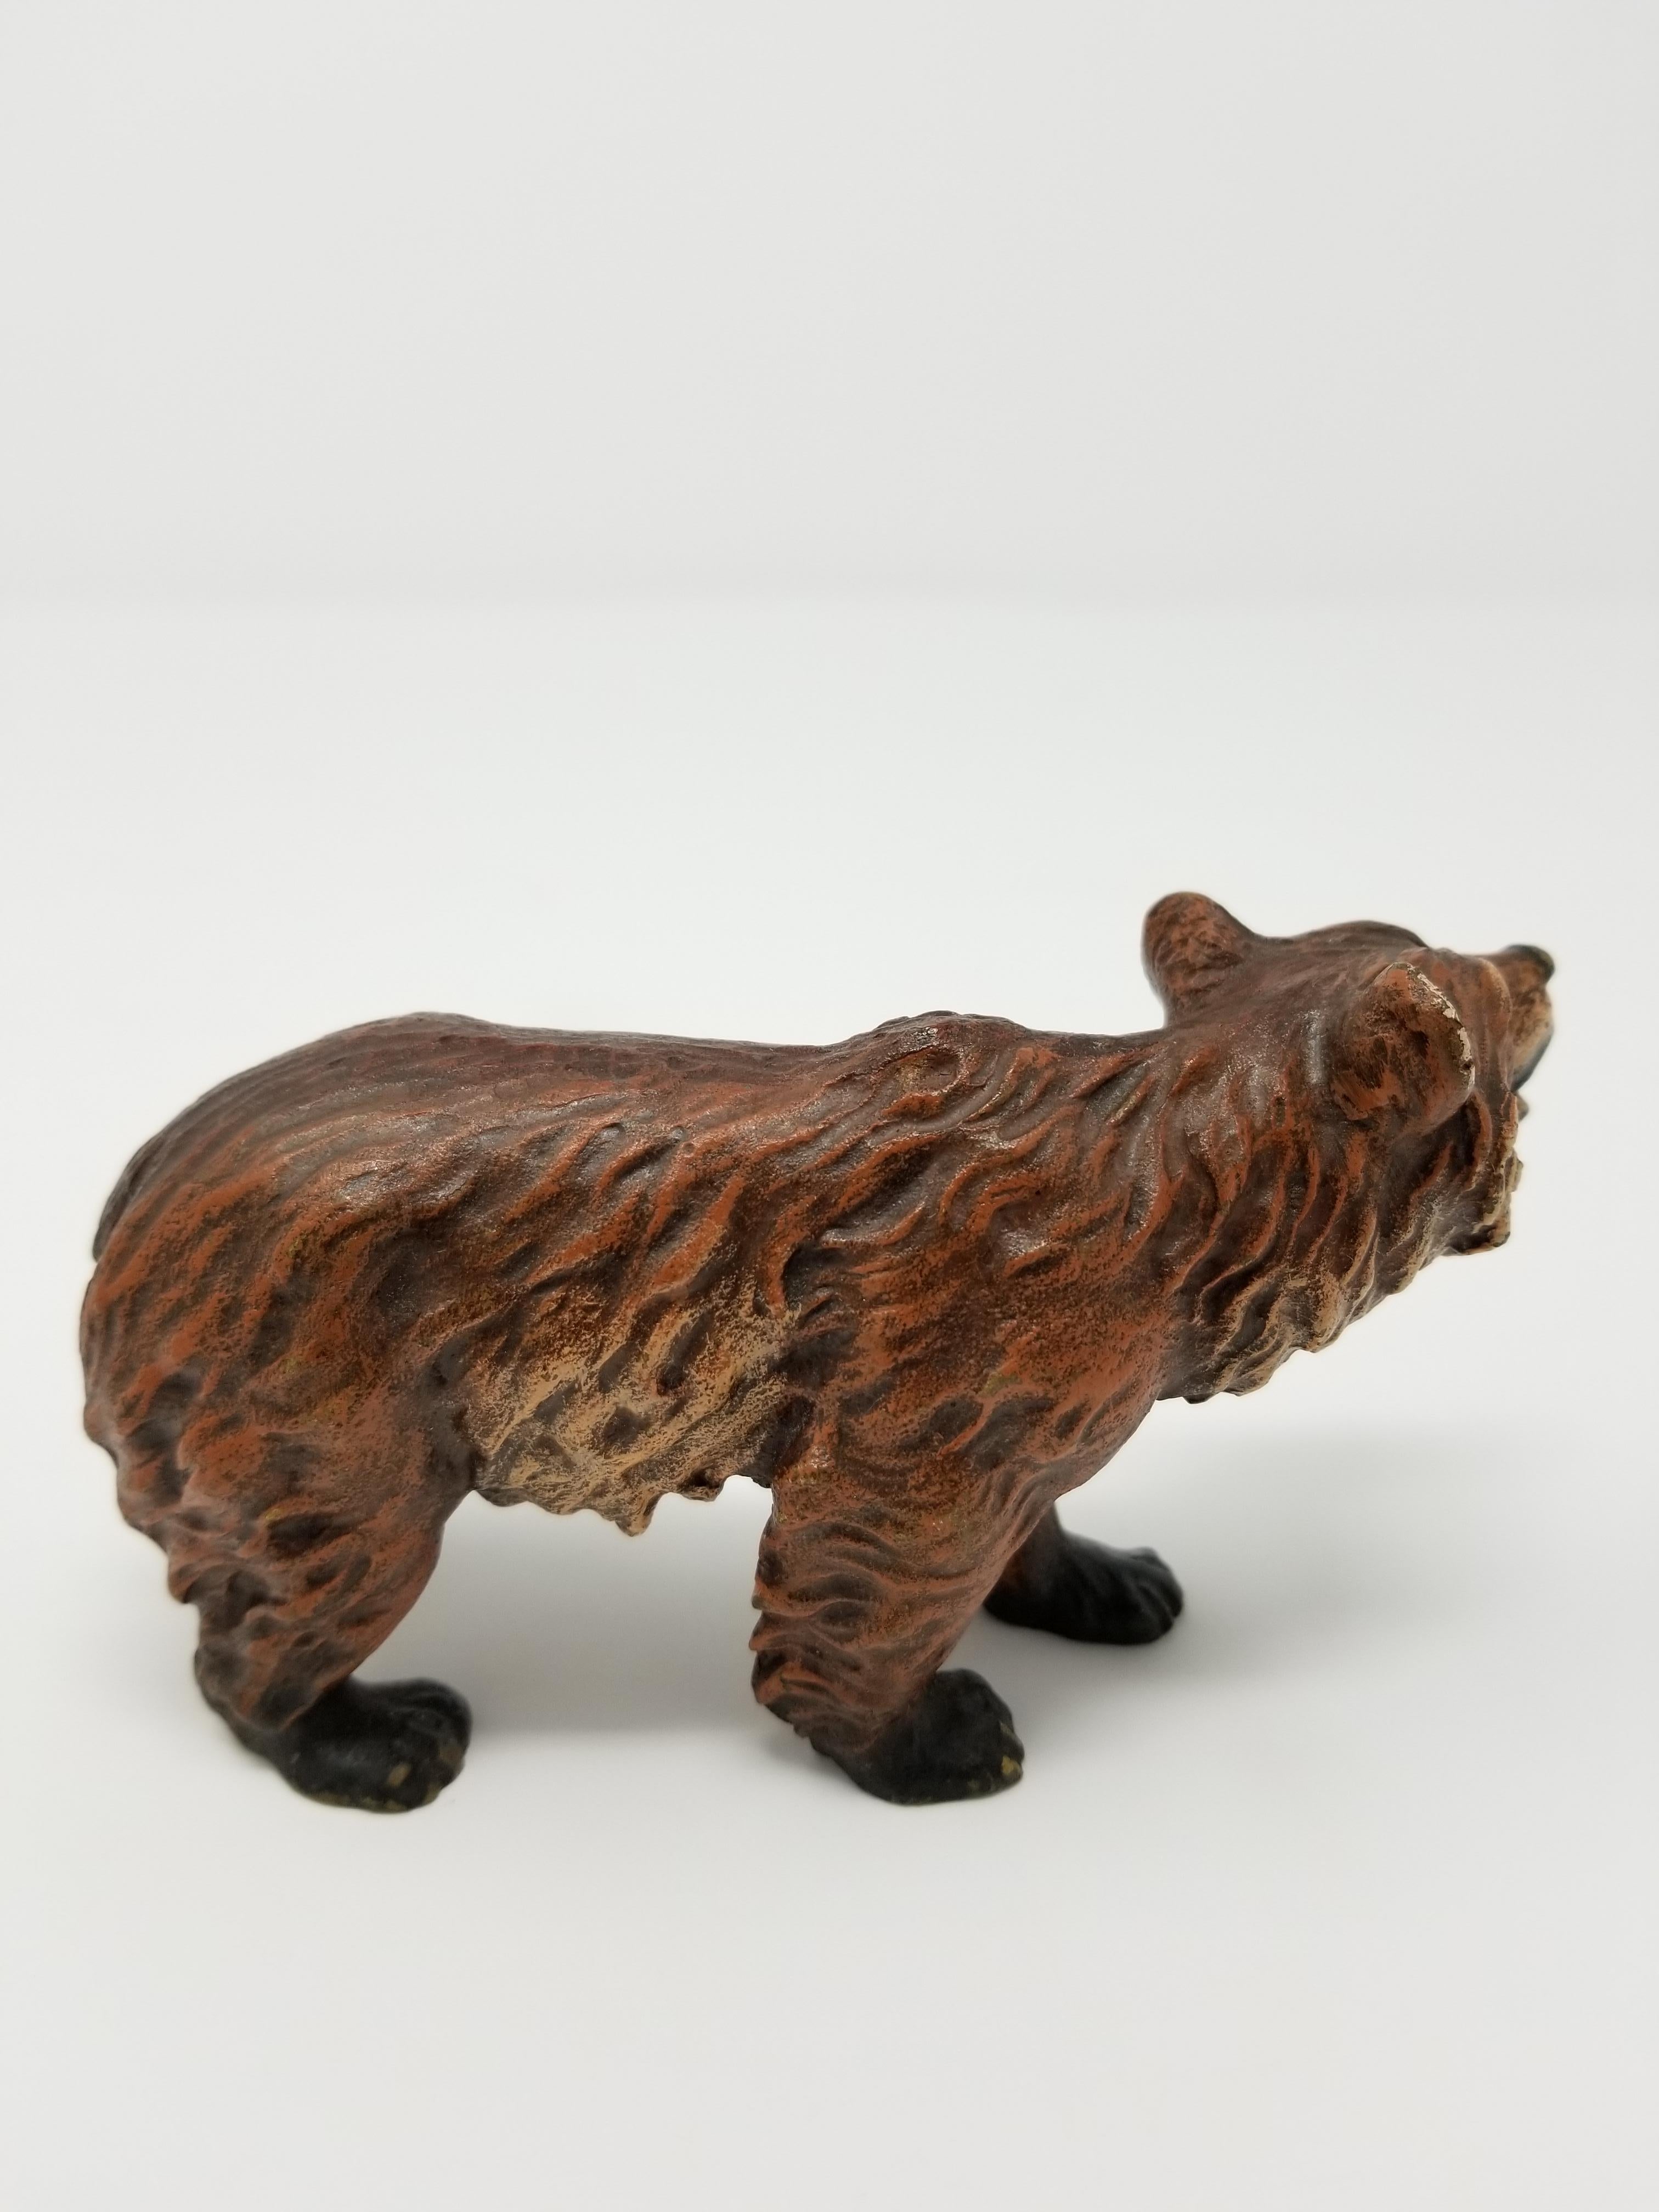 Viennese bronze figure of a bear, stamped Austria. Beautifully hand painted with realistic multi-tone brown fur, open mouth, and black eyes.
Vienna, circa 1900.